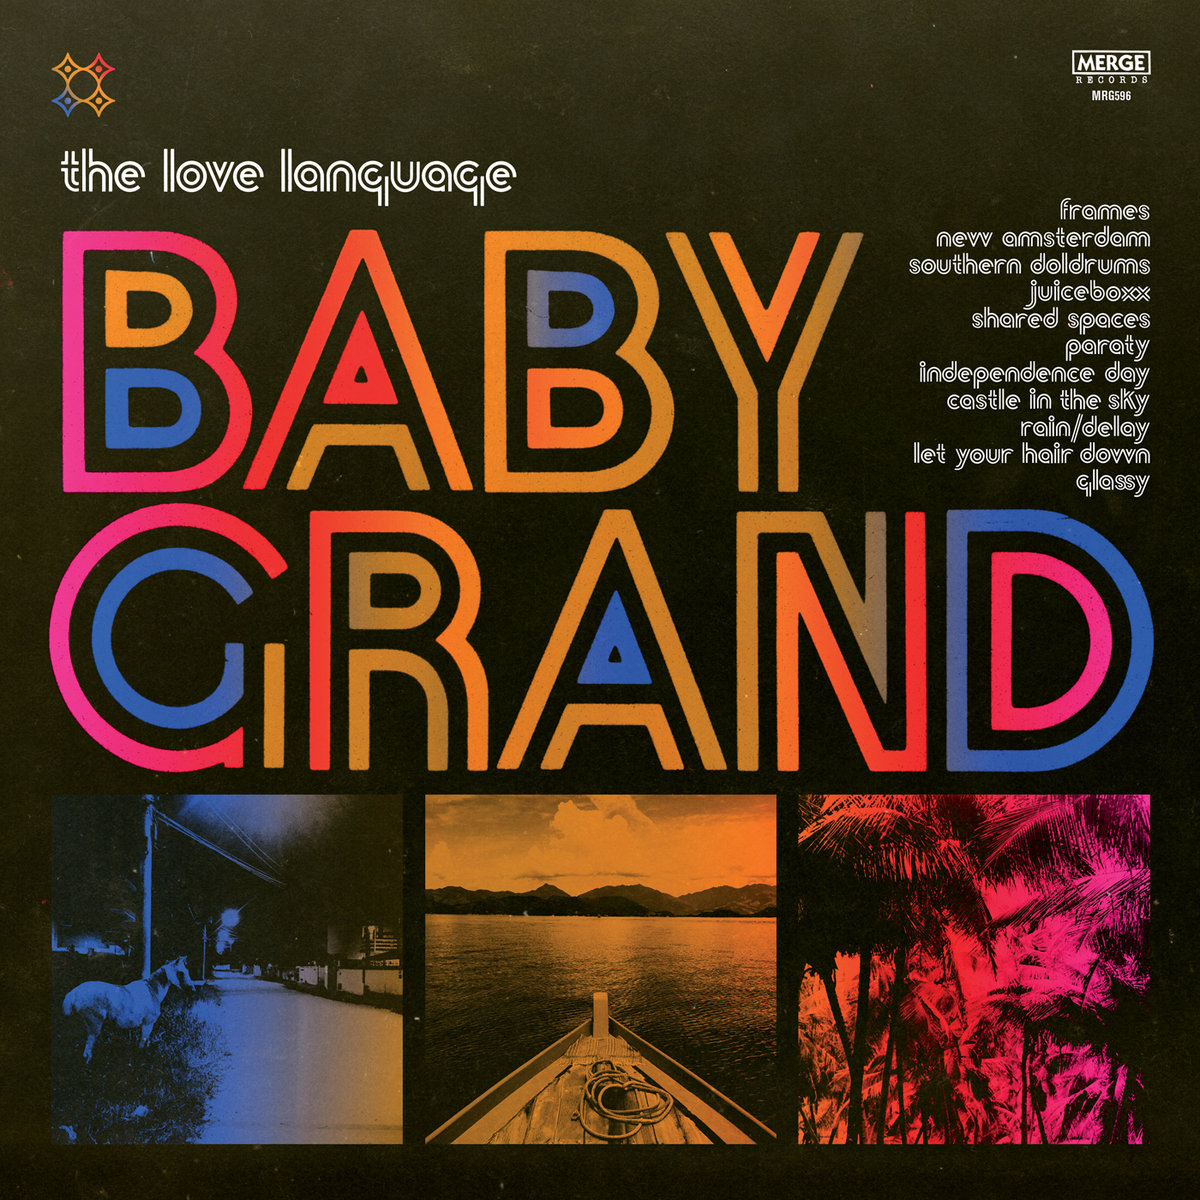 The Love Language Baby Grand Review For Northern Transmissions